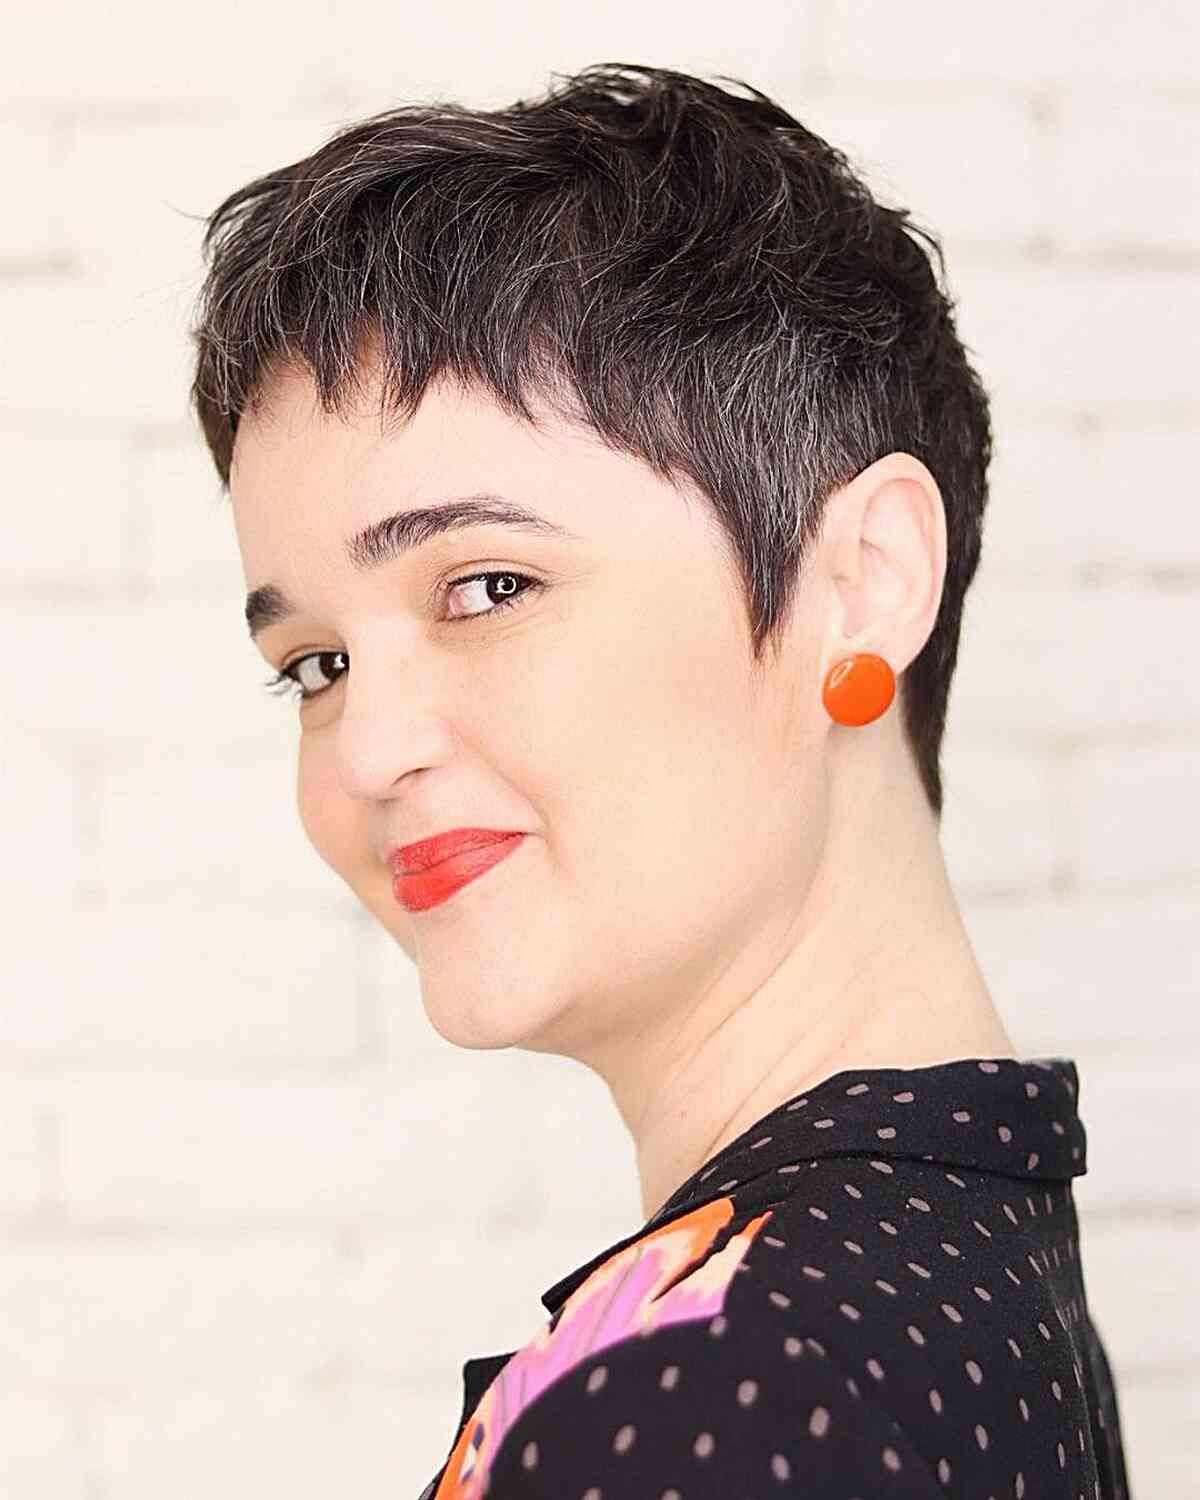 Salt and Pepper Thin Pixie Cut for women with very short hair